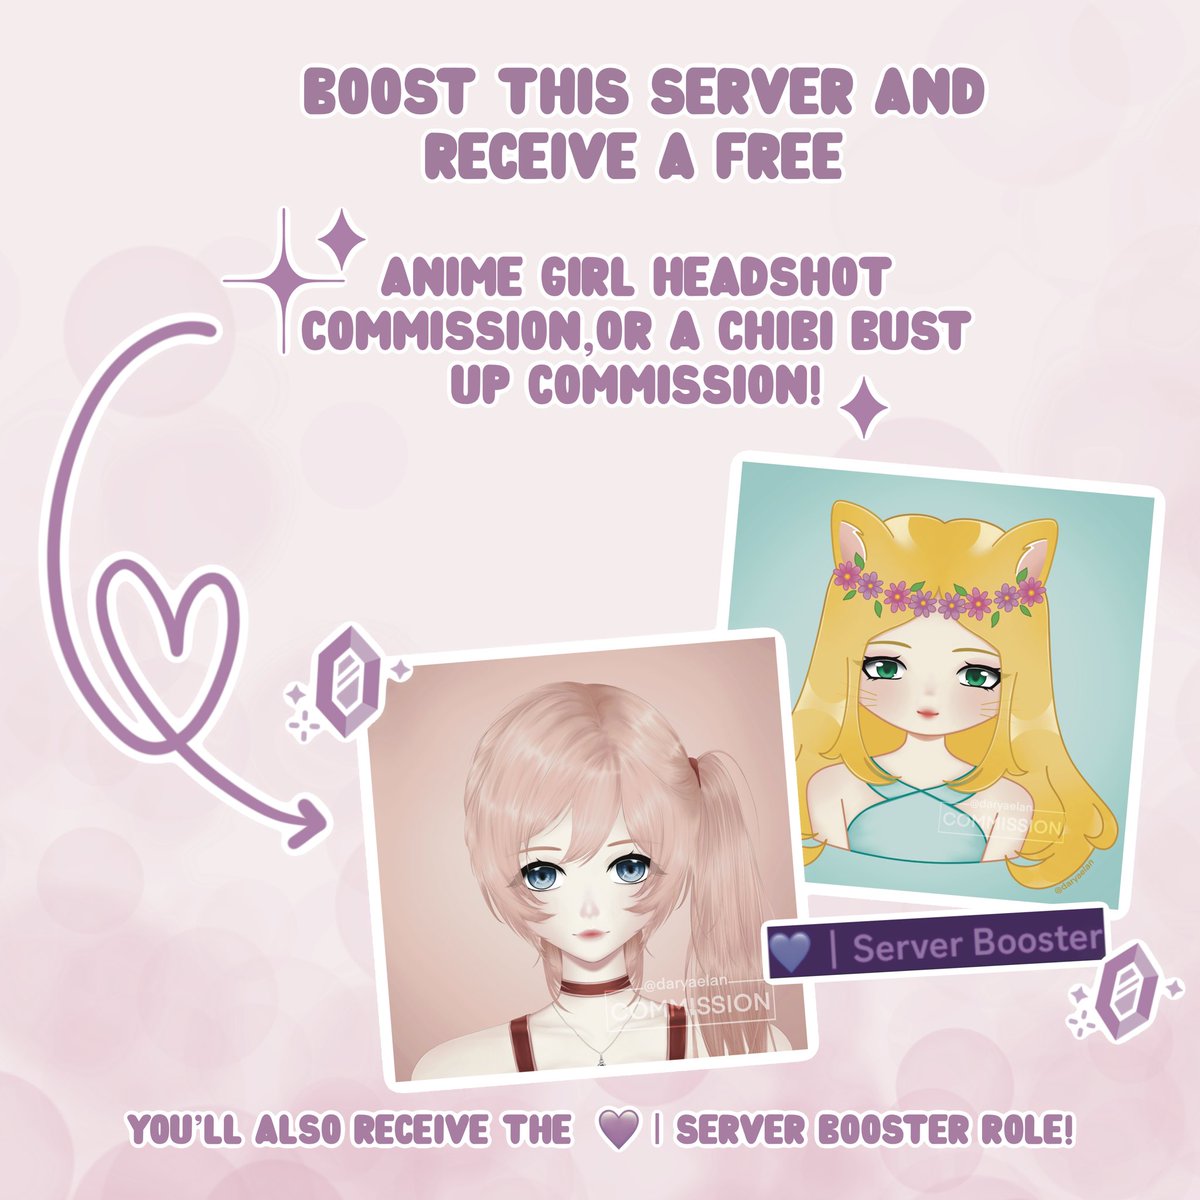 I’m super excited to announce that my #Discordserver is live! 📢 💜 

Please join in if you are an artist or just looking for a fun place to hang out! There’s lots of channels waiting there for you! 🤩

Swipe to see my Server Booster special awards! 🫶🏻💫

discord.gg/CHuMEtdMHx